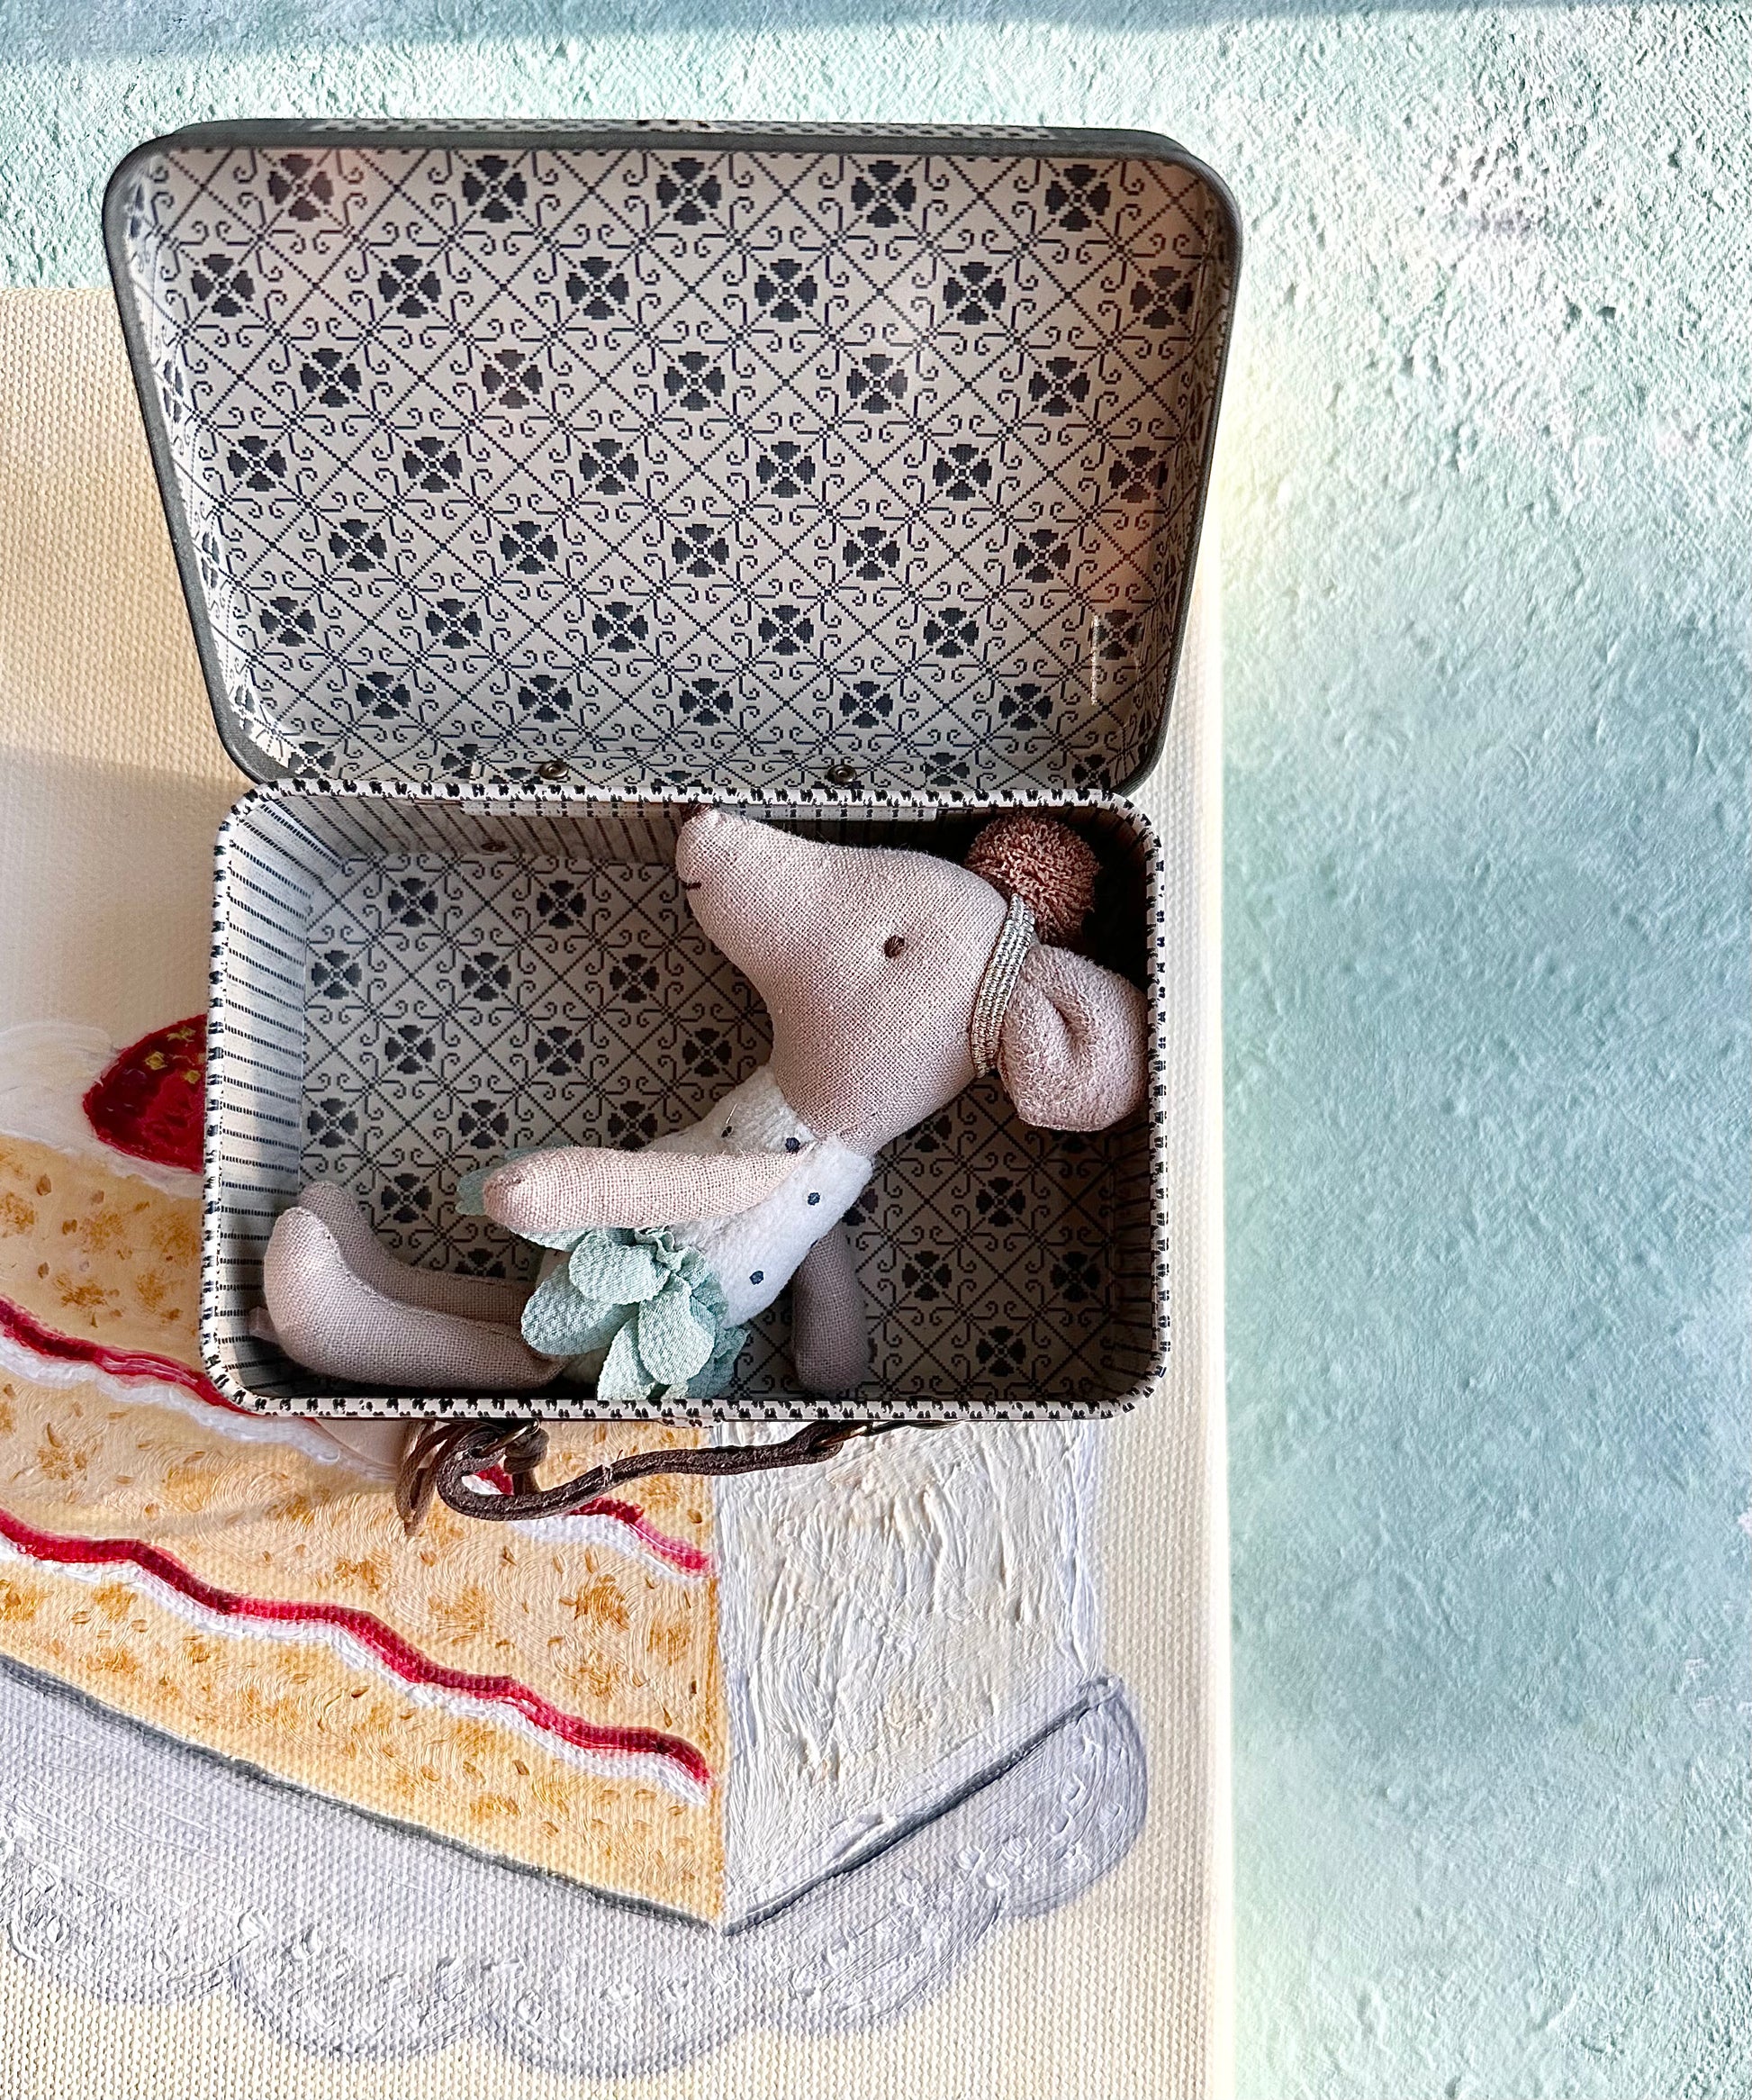 Little Miss Mouse in Suitcase - 2020